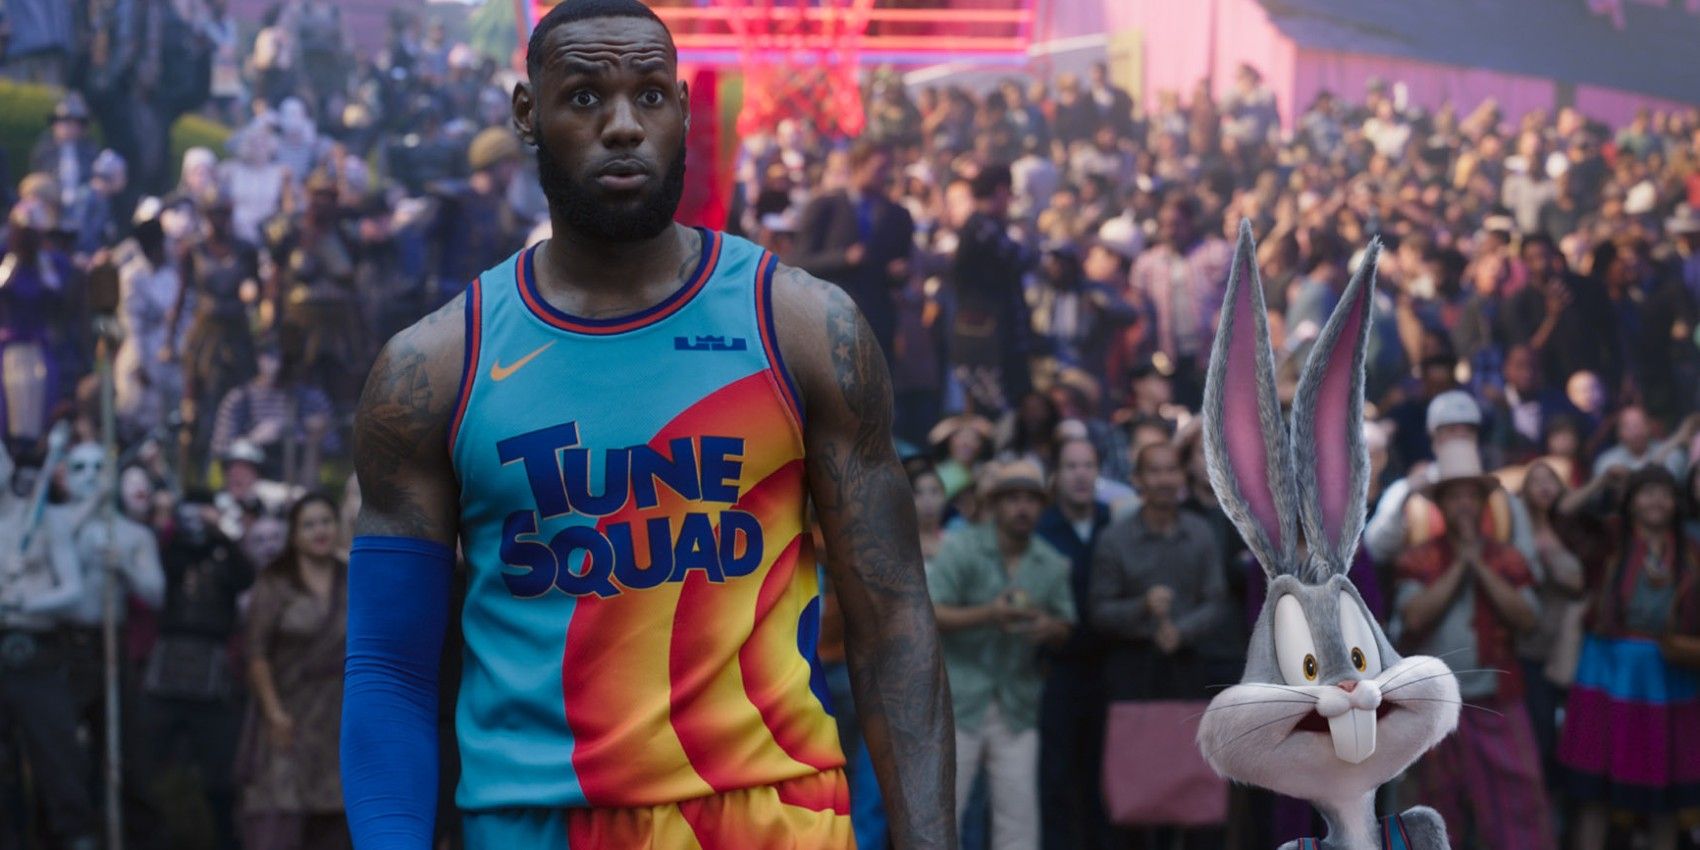 Space Jam 2 10 Theories Fans Have Based On The New Trailer